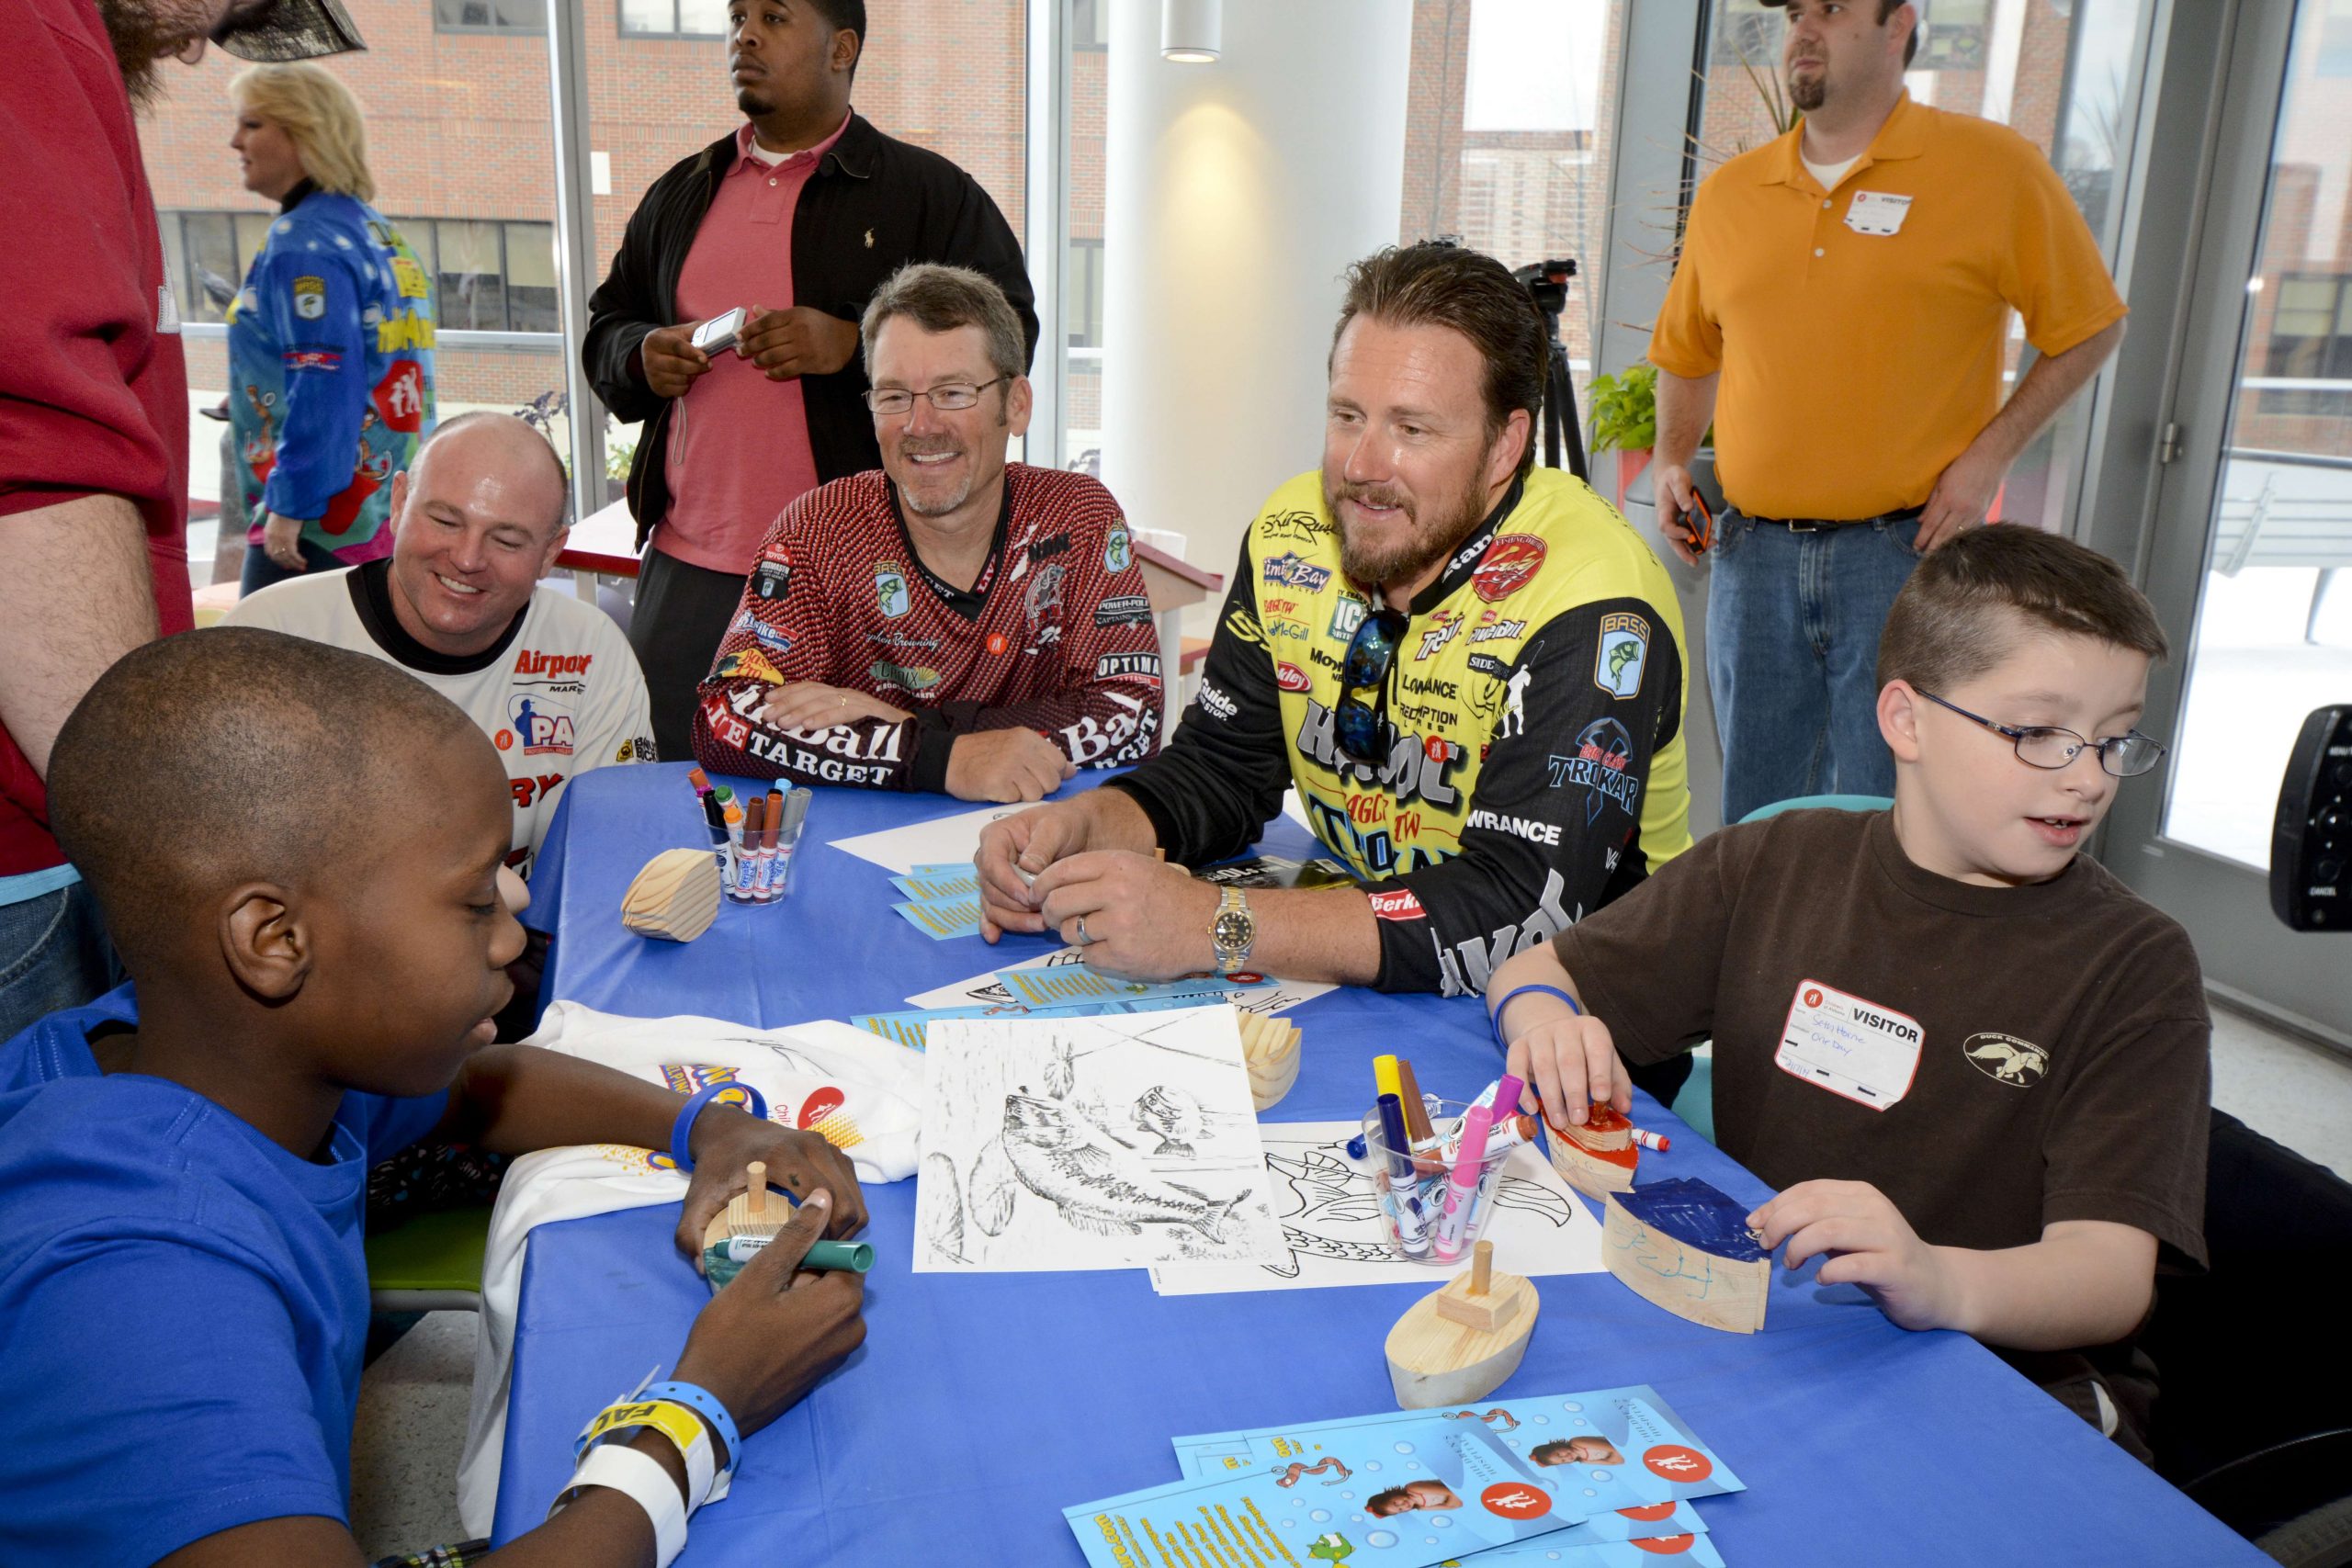 Skeet Reese, Coby Carden and Stephen Browning join two children at their craft table.